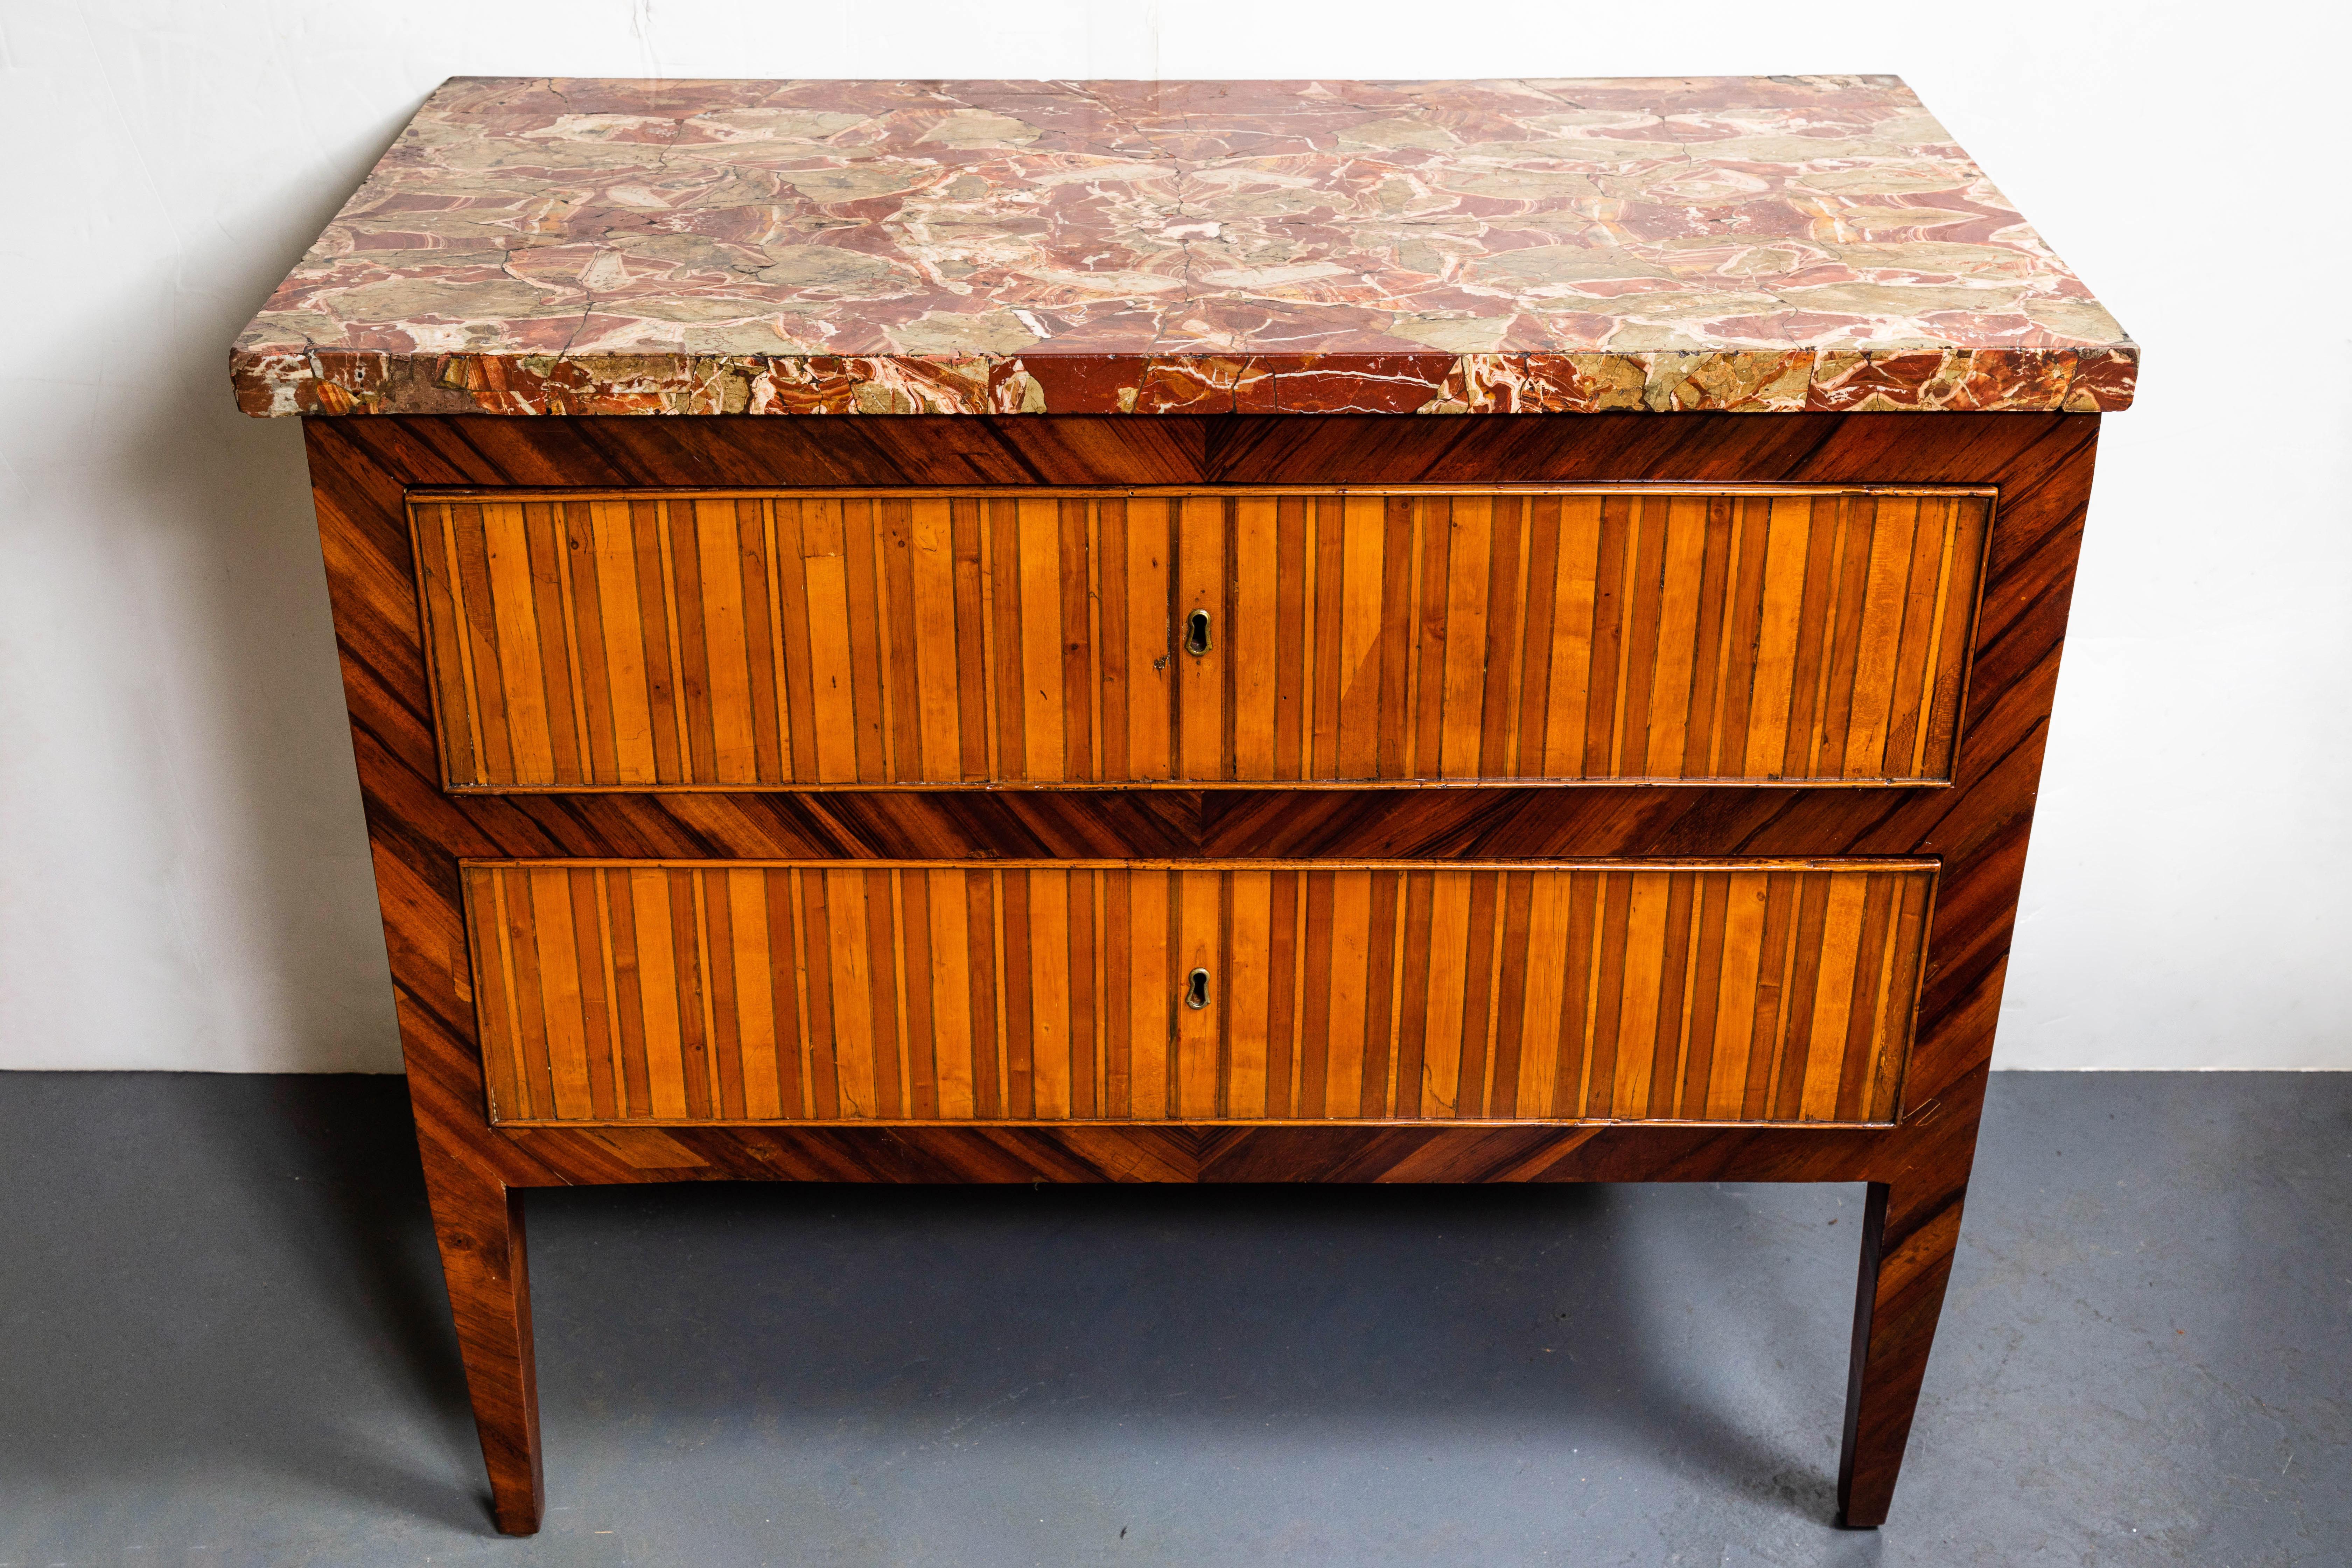 Rare and wonderful, 18th century, two-drawer commode from Genoa featuring four panels of fabulous striping in pear, walnut, and fruit woods. The whole on tapered legs and surmounted by a lush, original, now extinct, rouge marble slab.